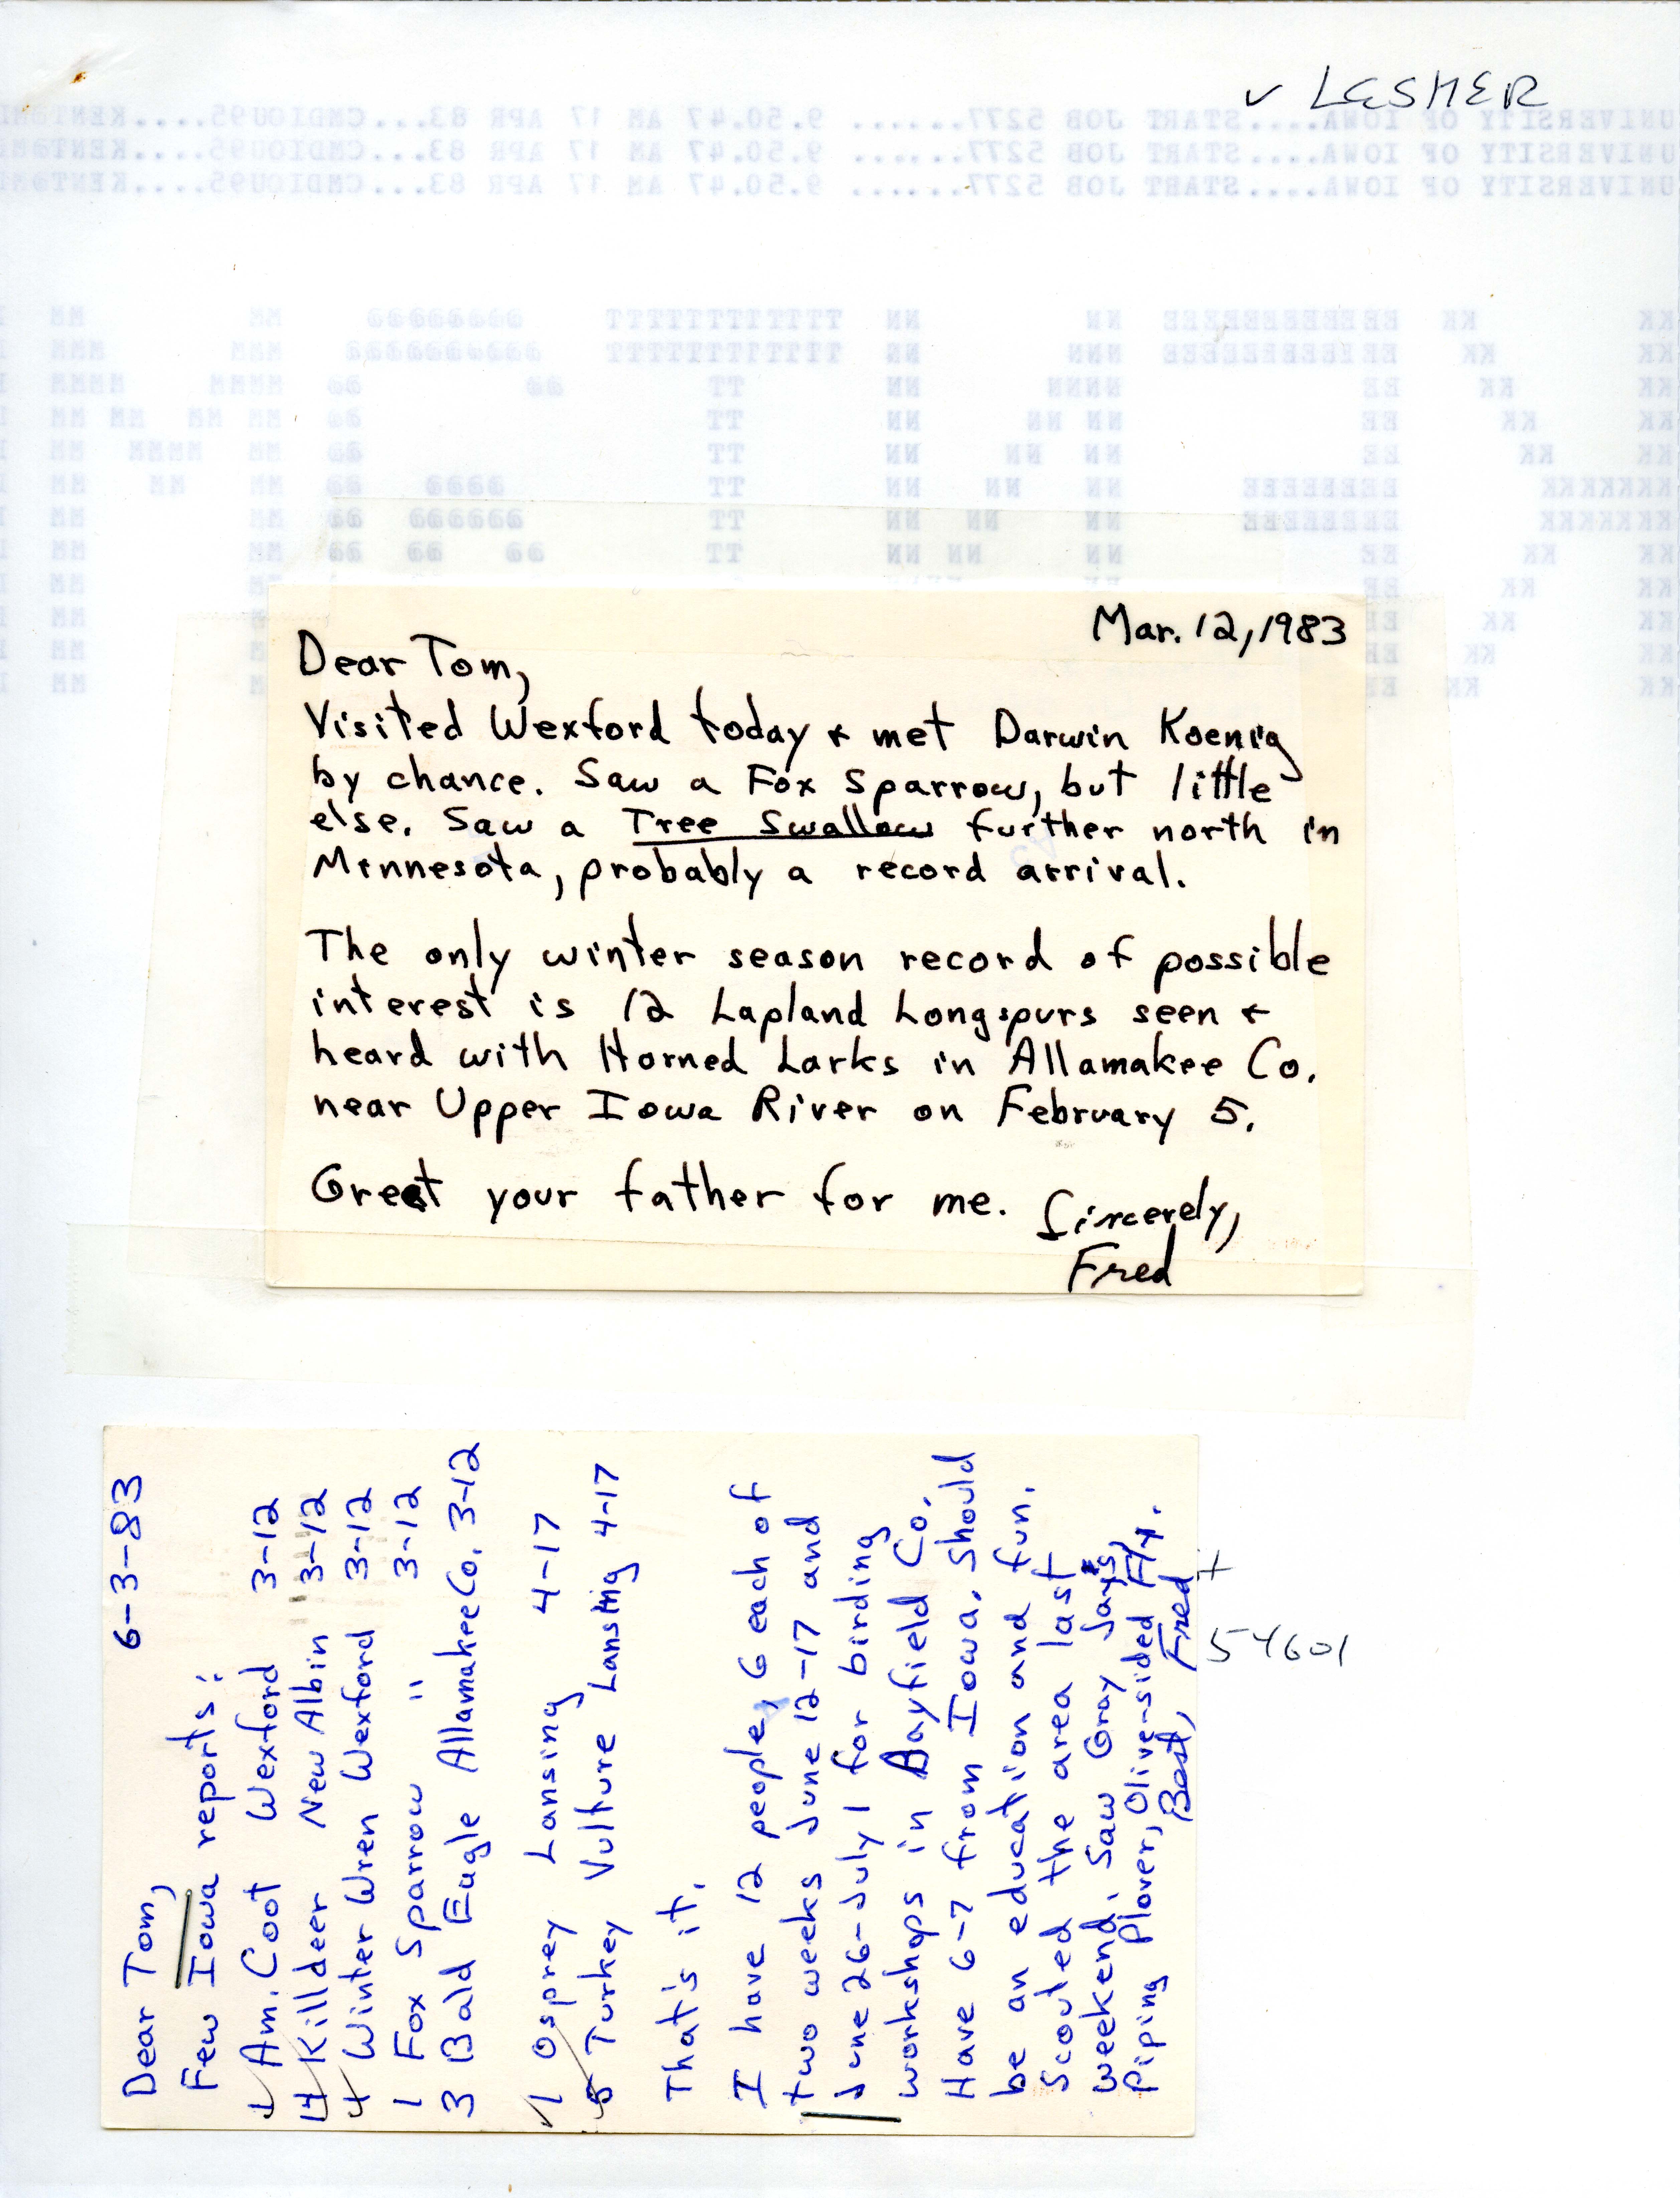 Fred Lesher letters to Thomas H. Kent regarding bird sightings, March 12, 1983 and June 3, 1983